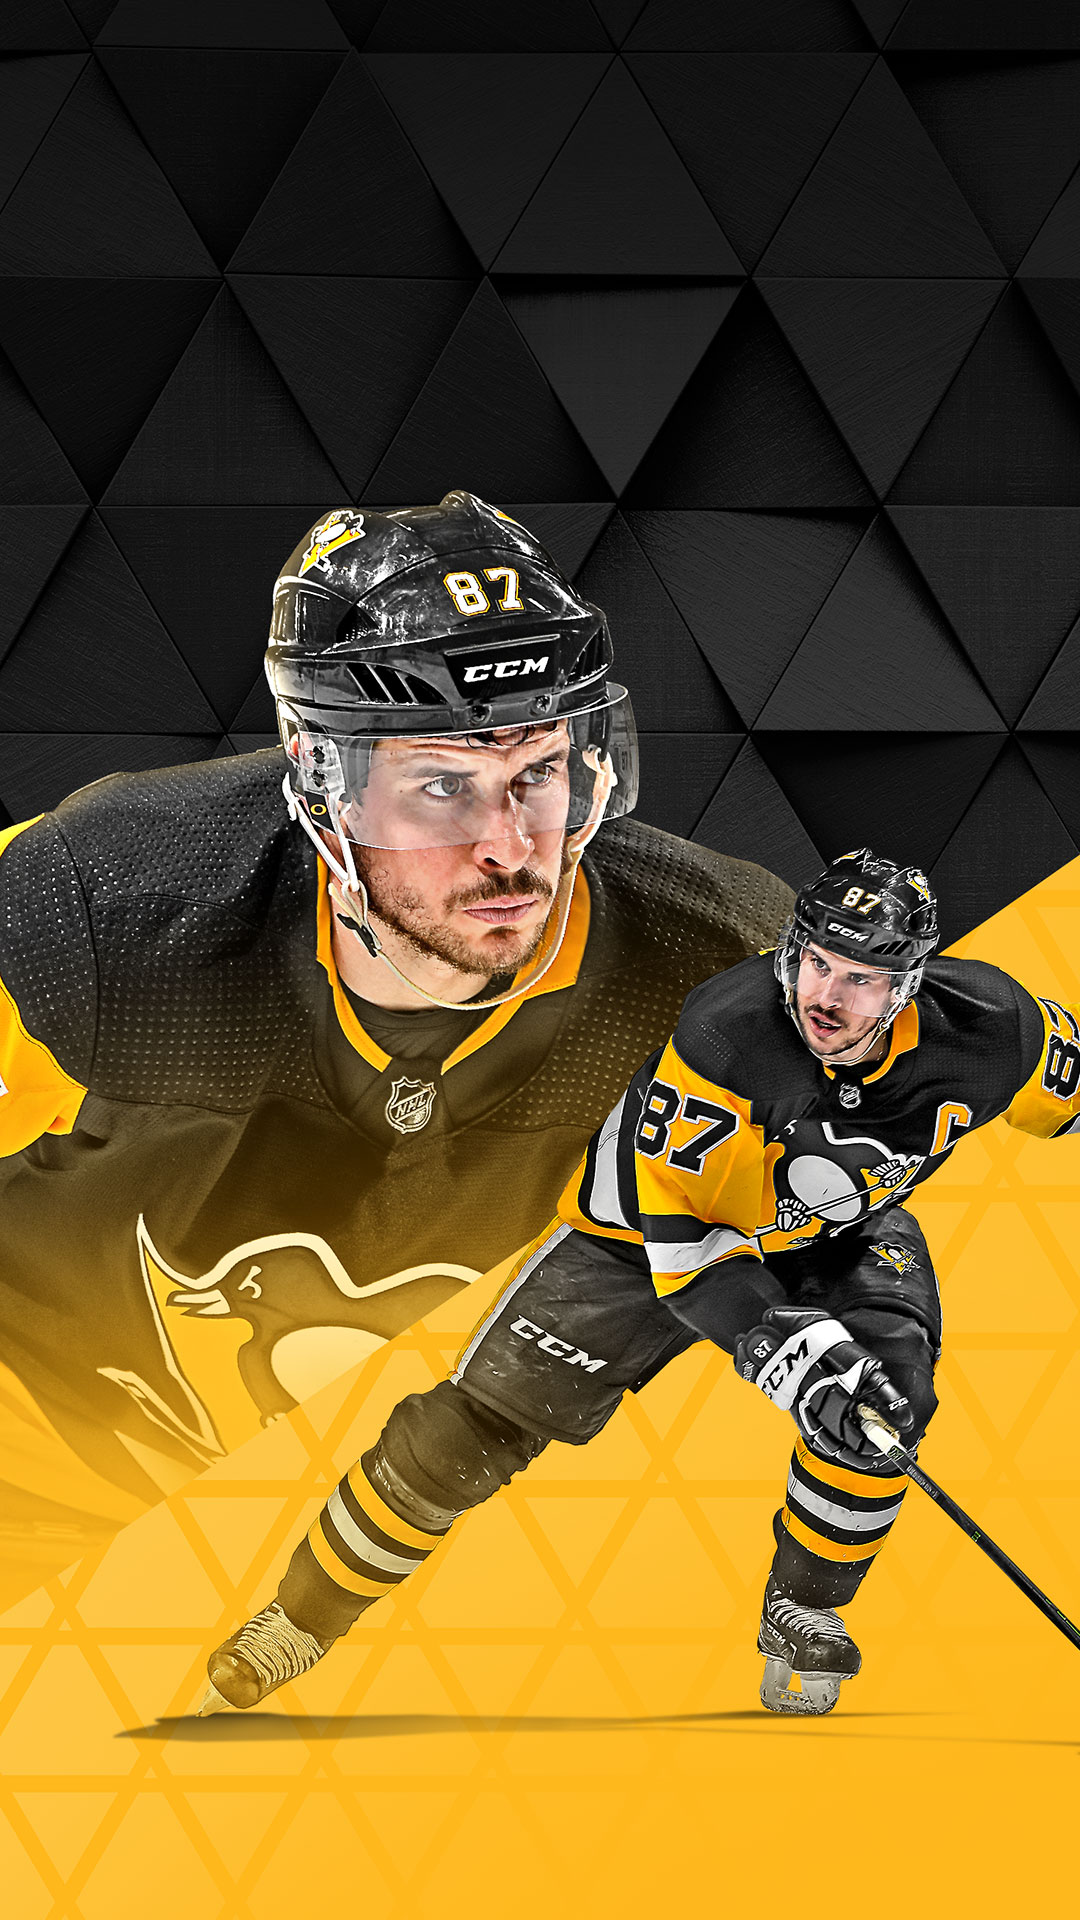 sidney crosby wallpaper,sports gear,stick and ball games,college ice ...